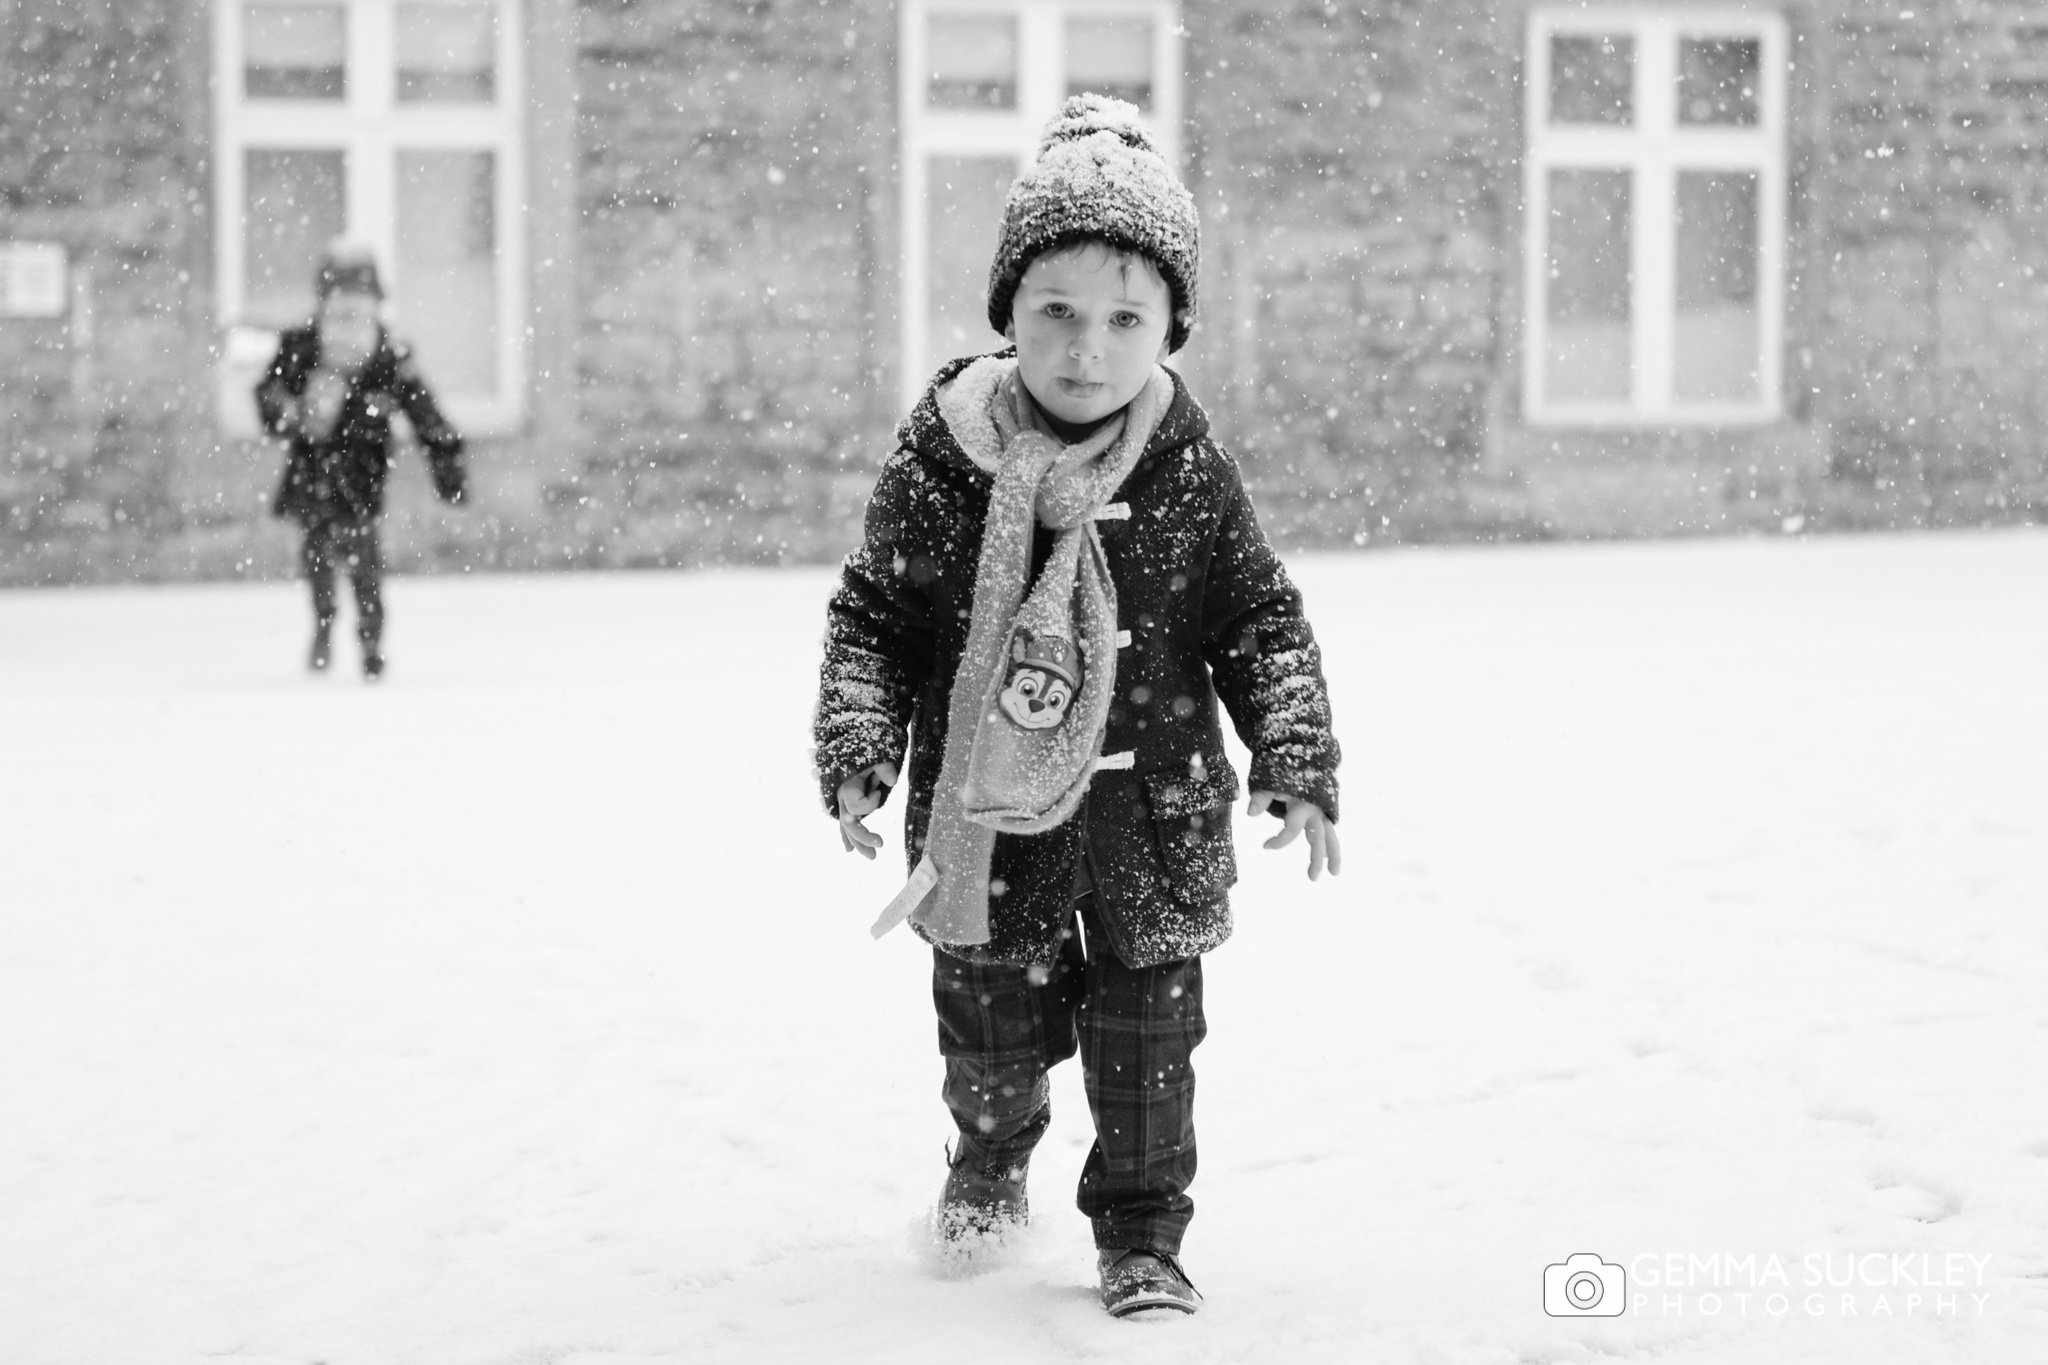 pageboys running in the snow after the wedding ceremony